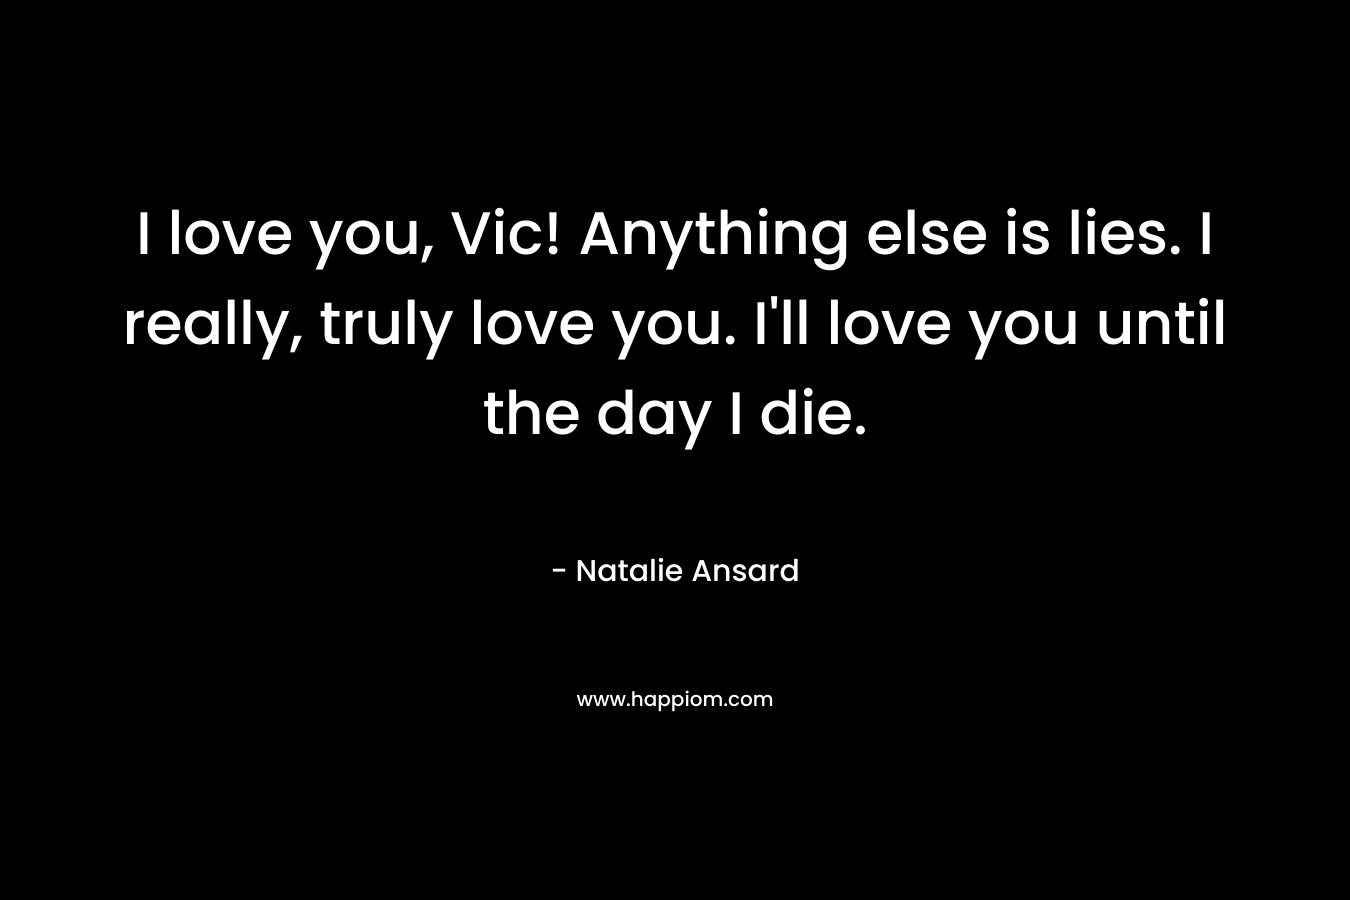 I love you, Vic! Anything else is lies. I really, truly love you. I'll love you until the day I die.